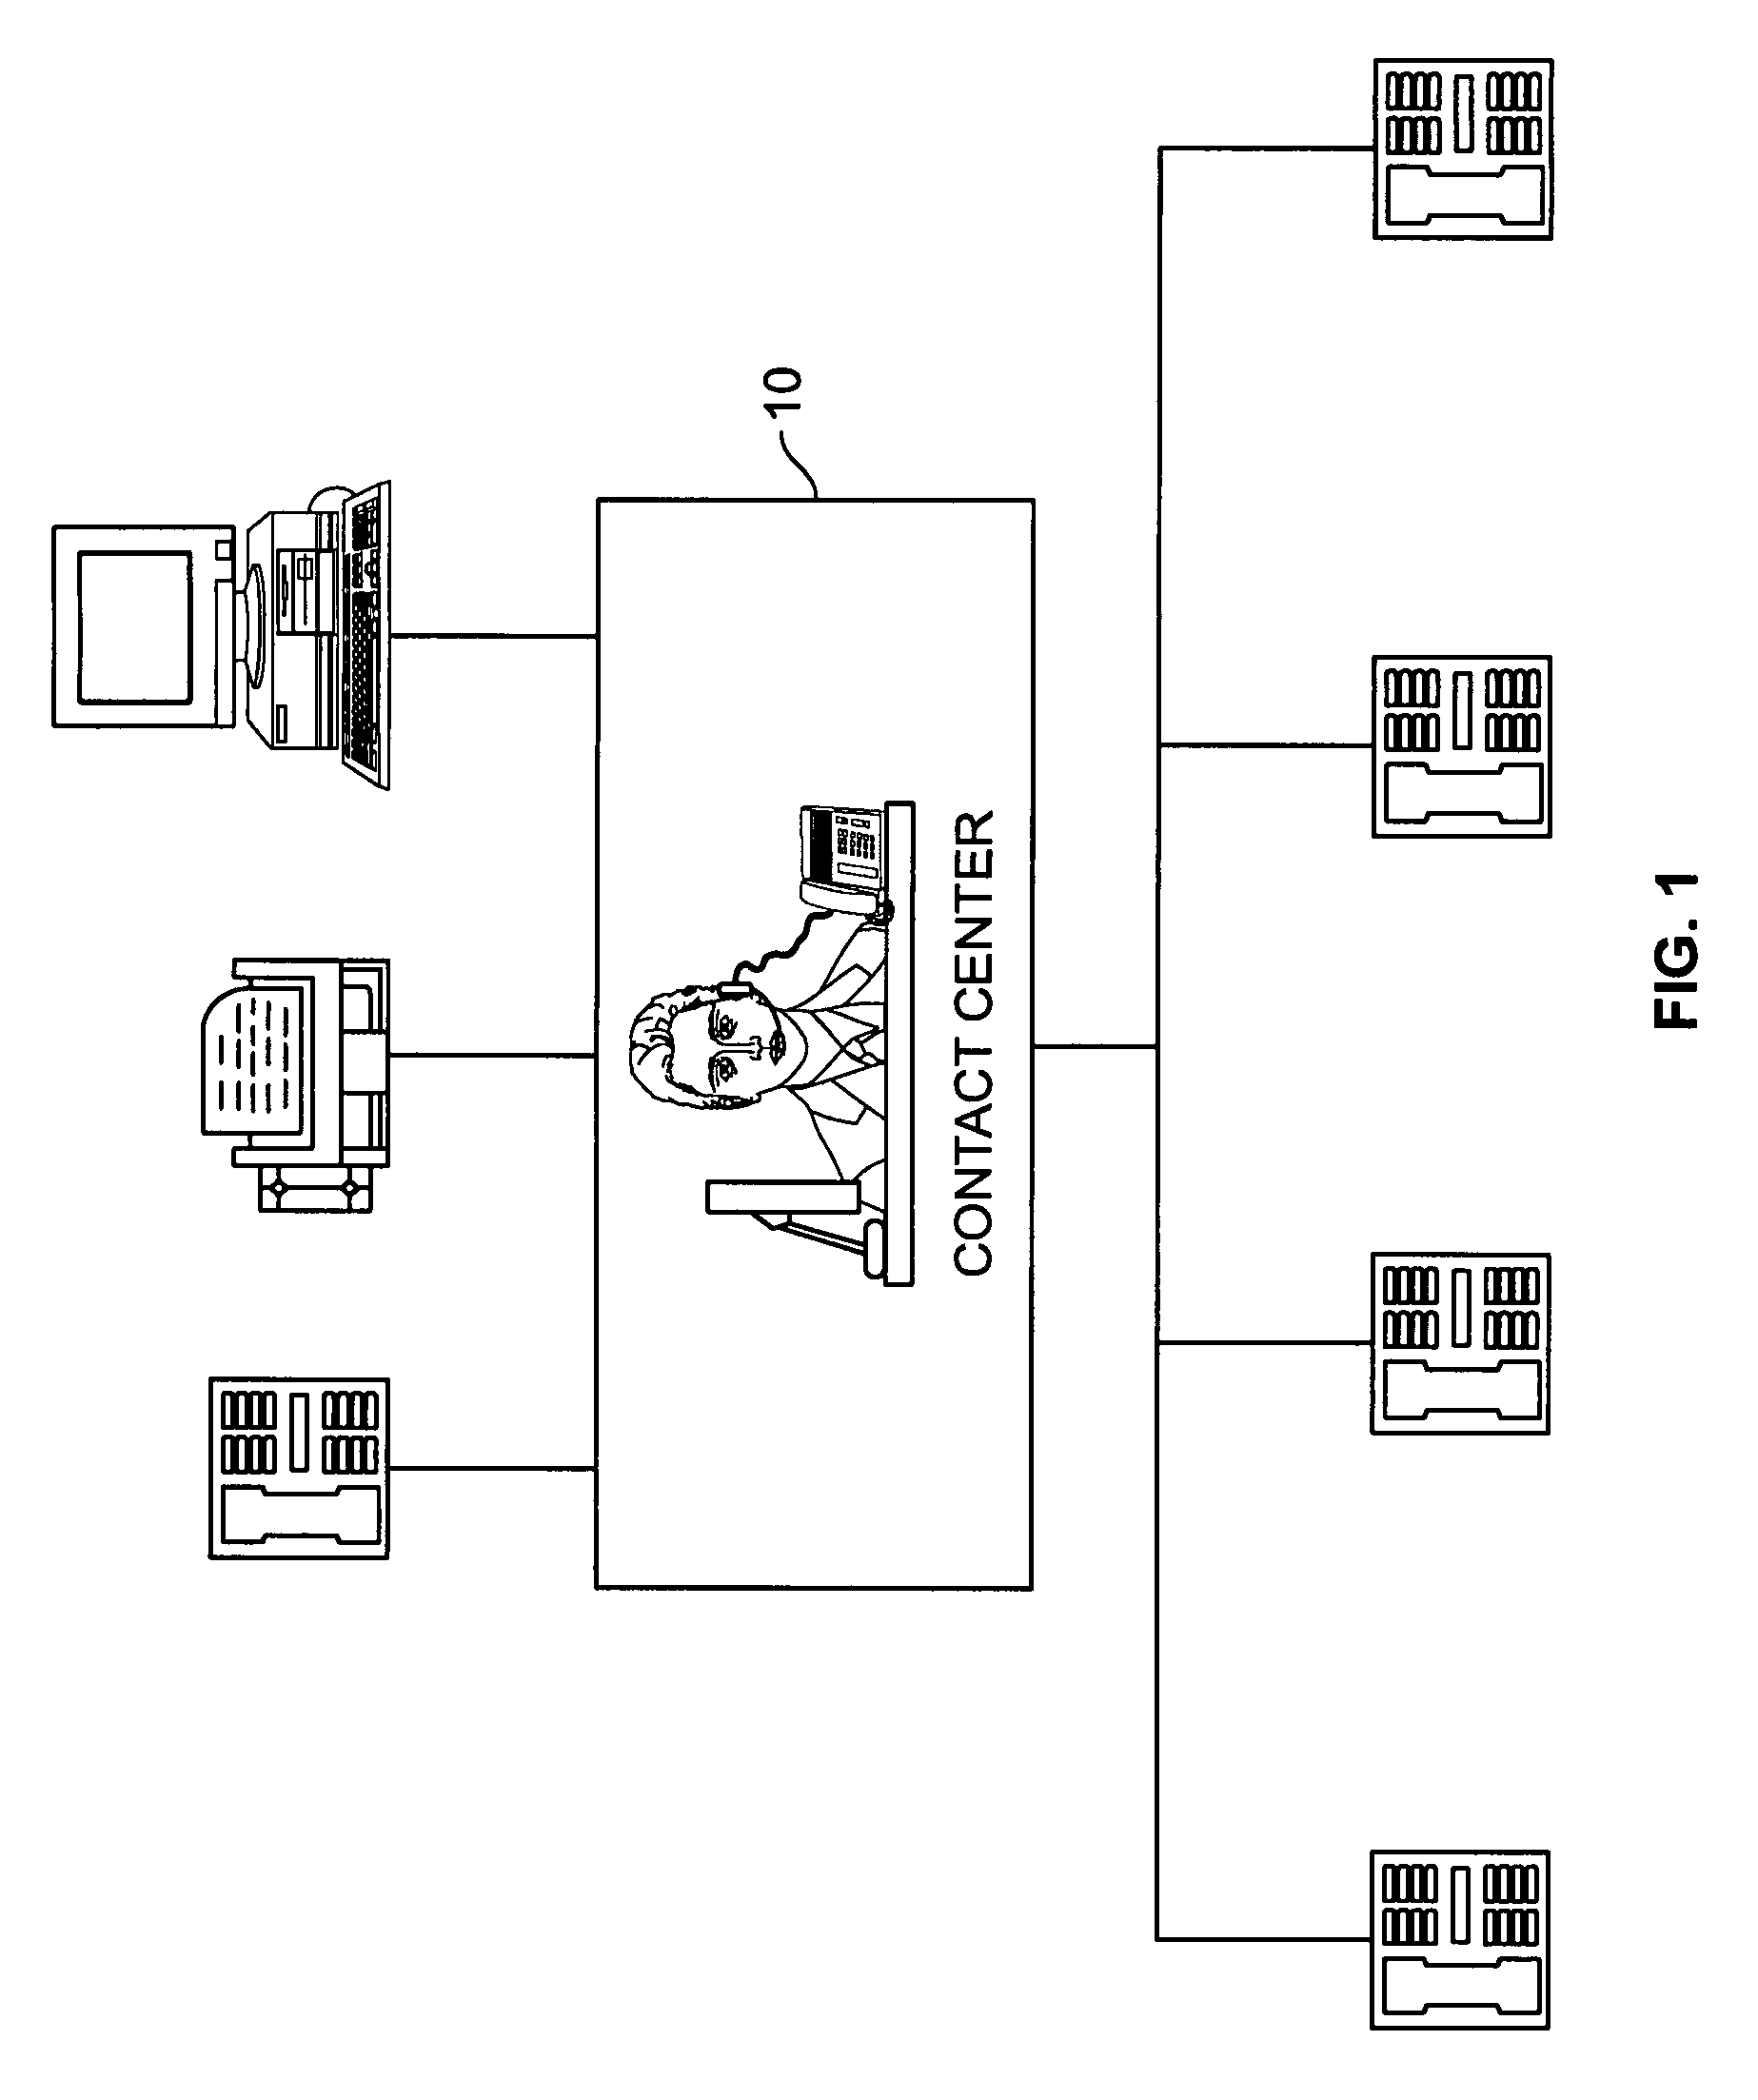 Method and system for aggregating and analyzing data relating to a plurality of interactions between a customer and a contact center and generating business process analytics